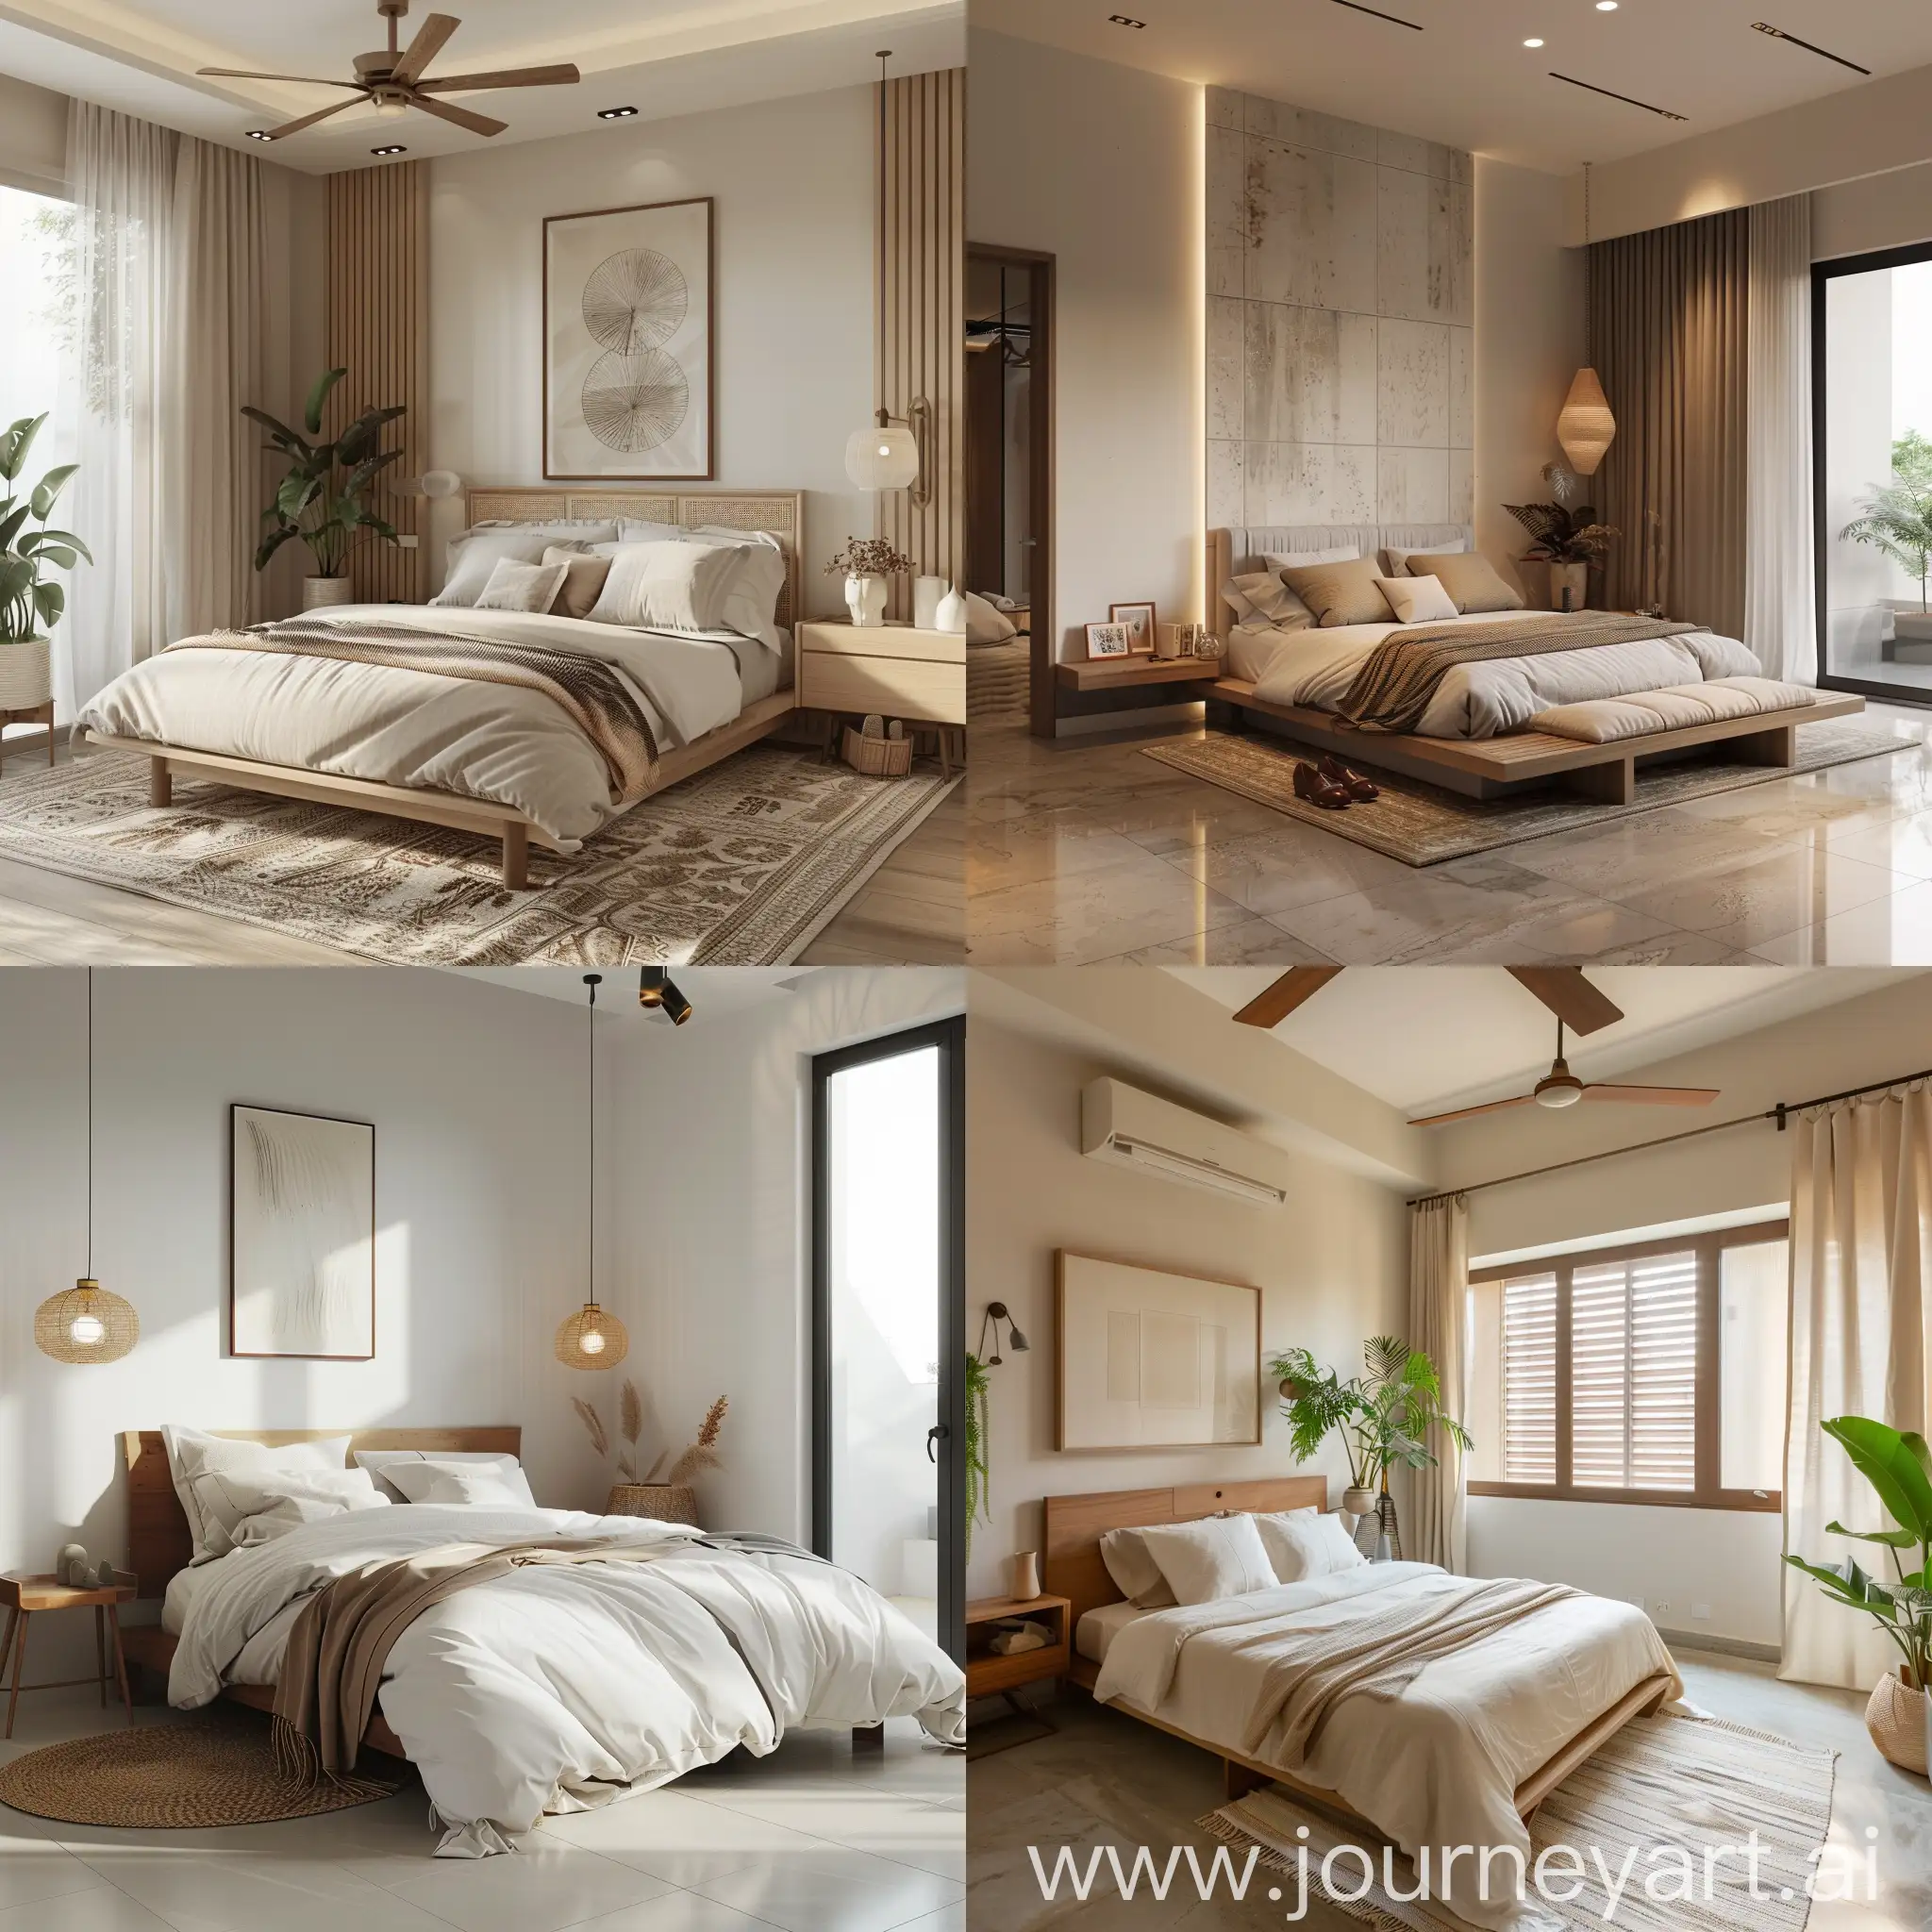 Minimalistic-Indian-Bedroom-Interior-Design-with-Clean-Lines